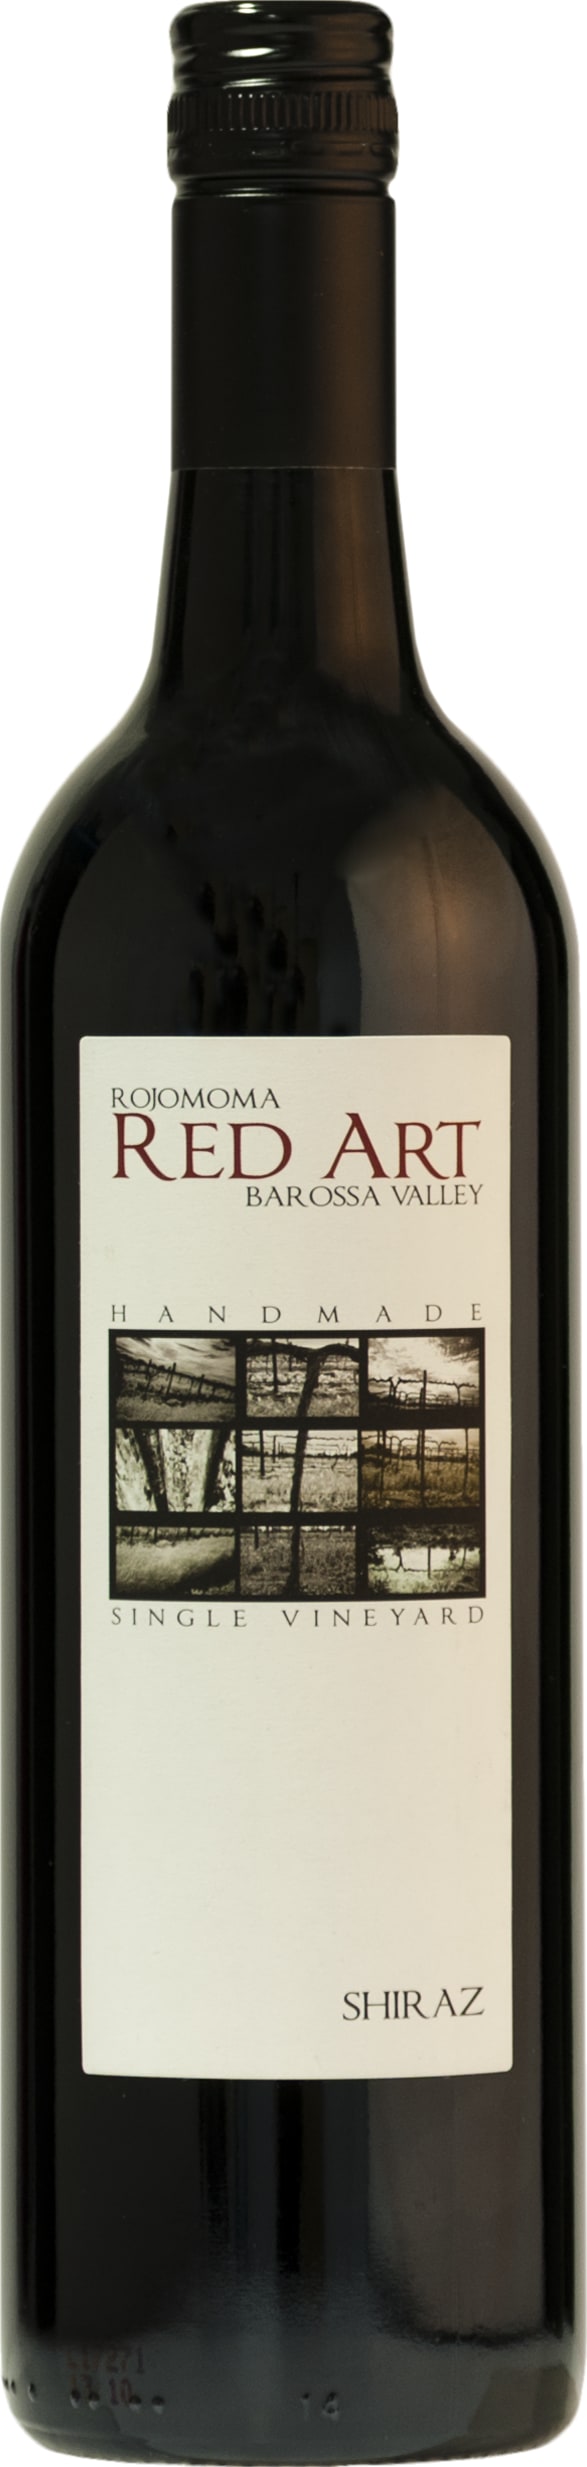 Rojomoma Red Art Shiraz (Cellar Release) 2012 6x75cl - Just Wines 